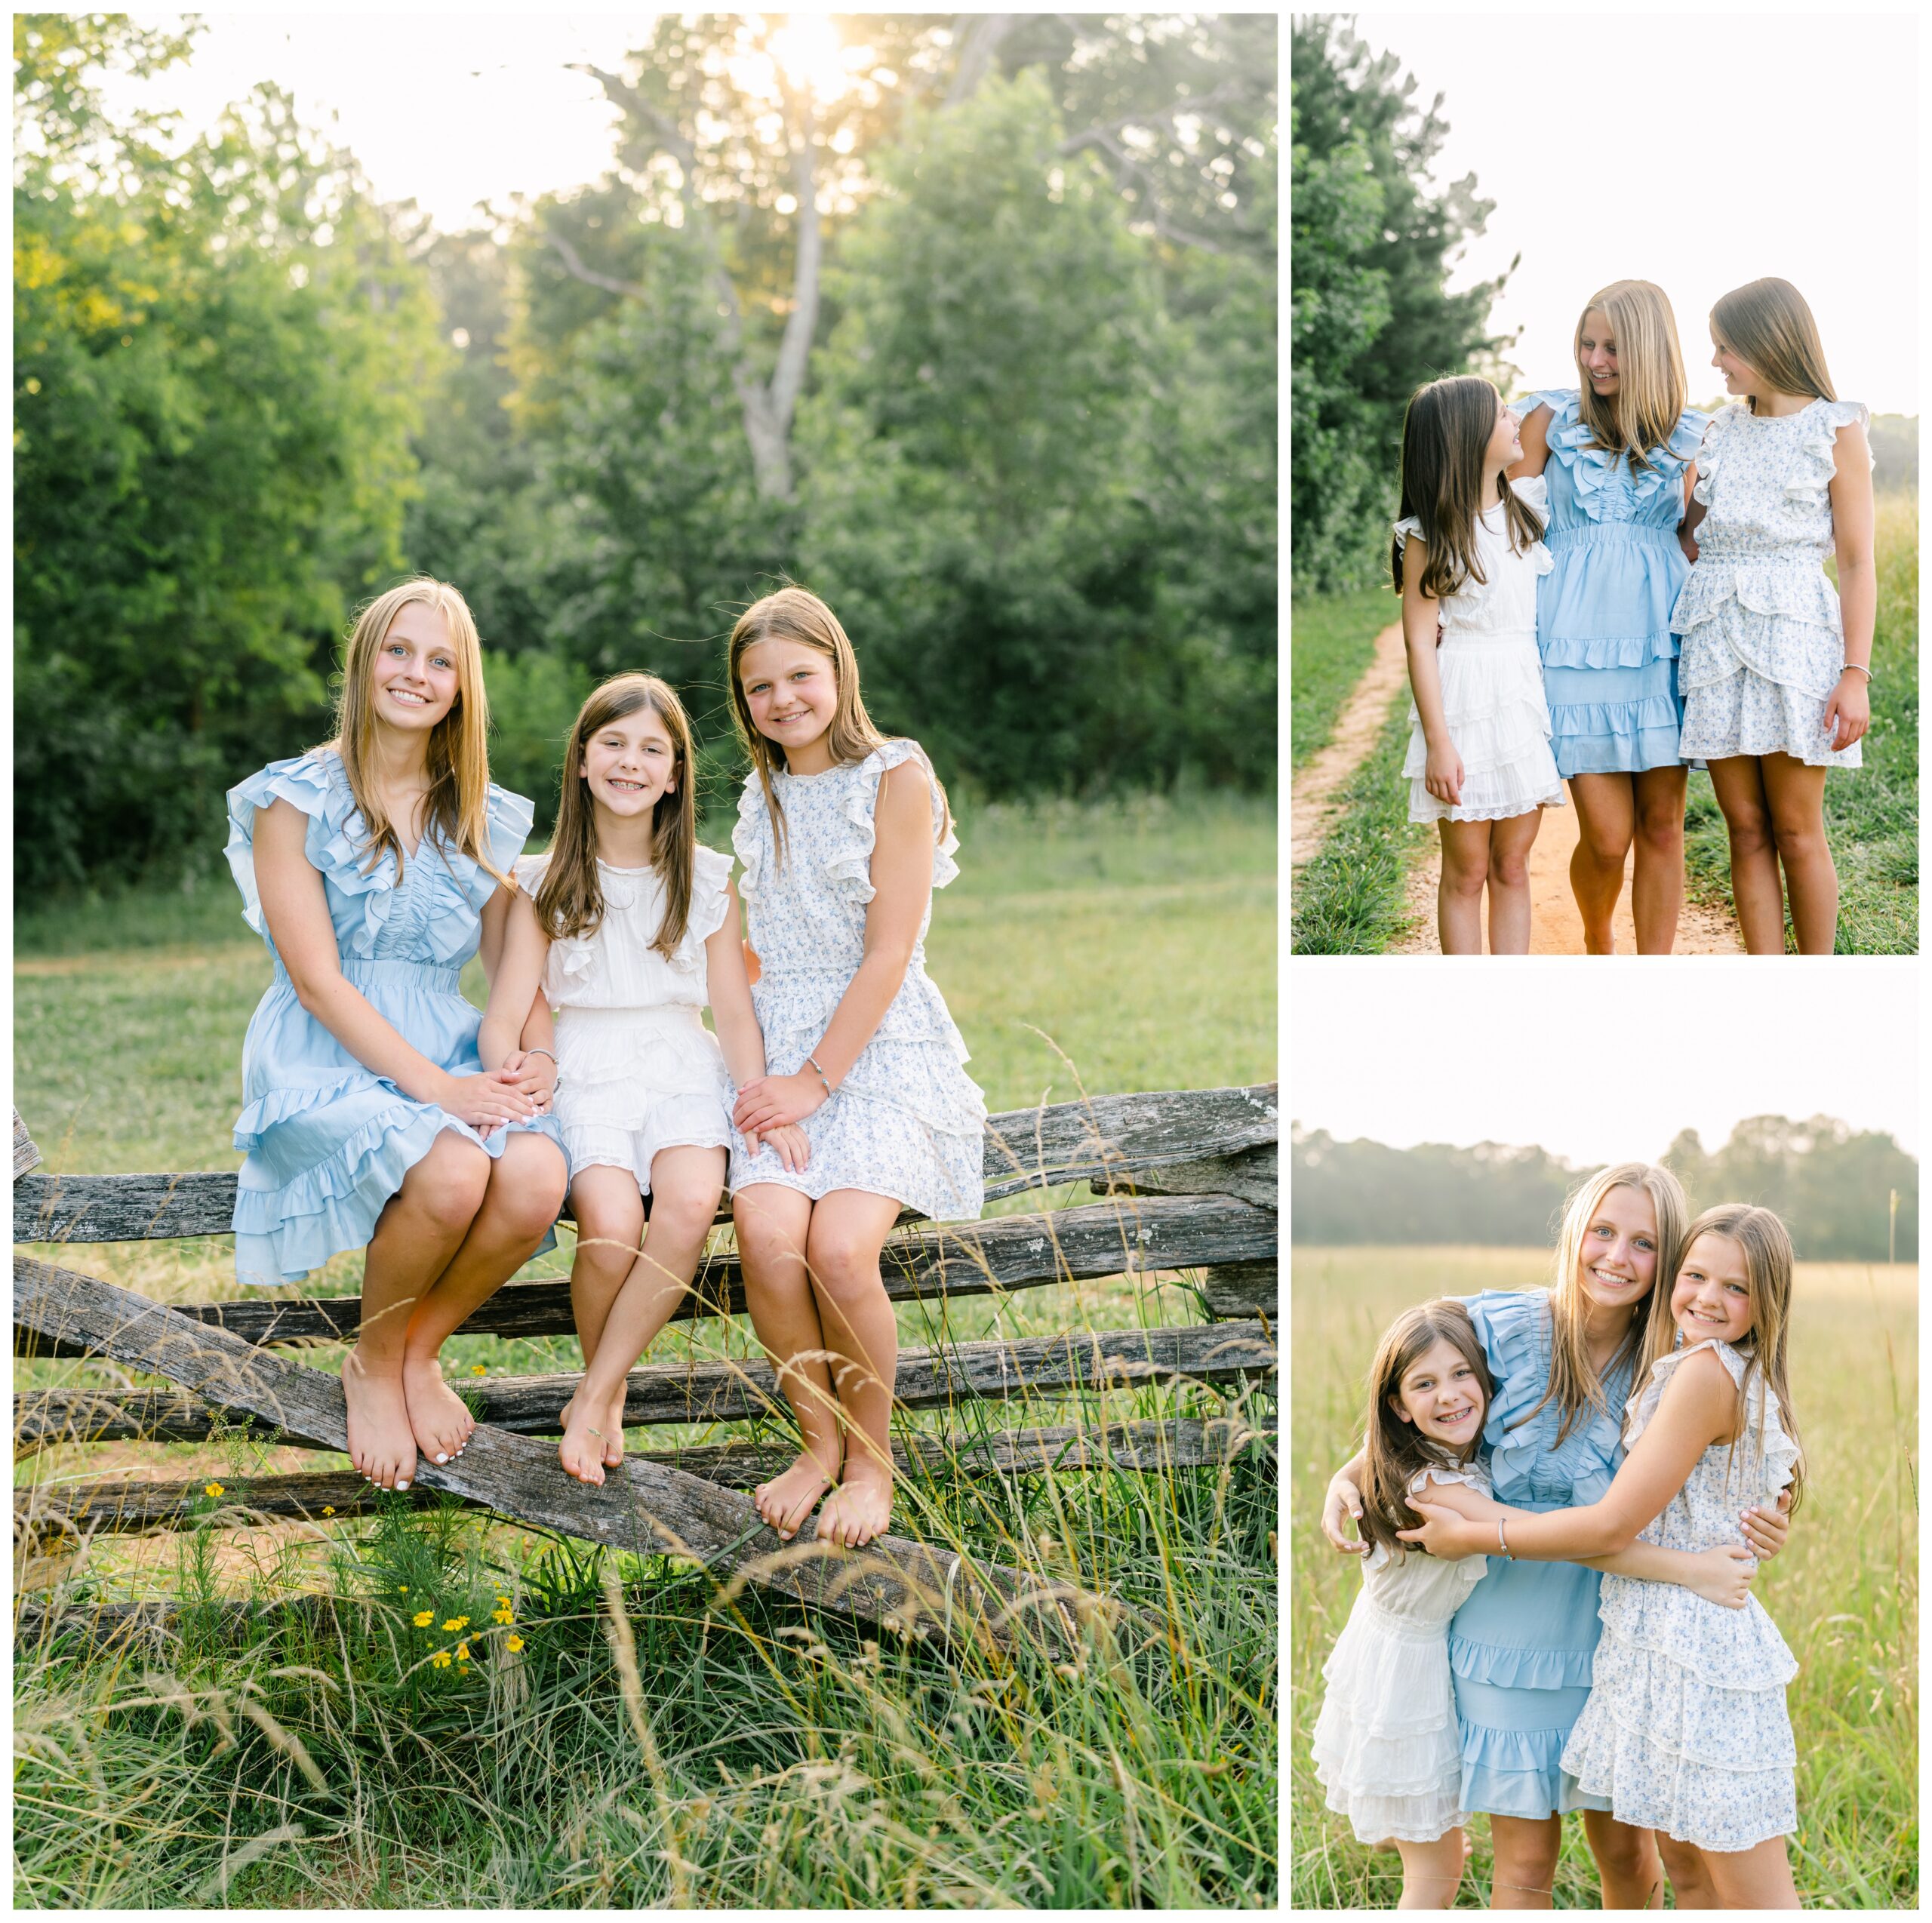 Photos of three sisters posing in a field and on a wooden fence.